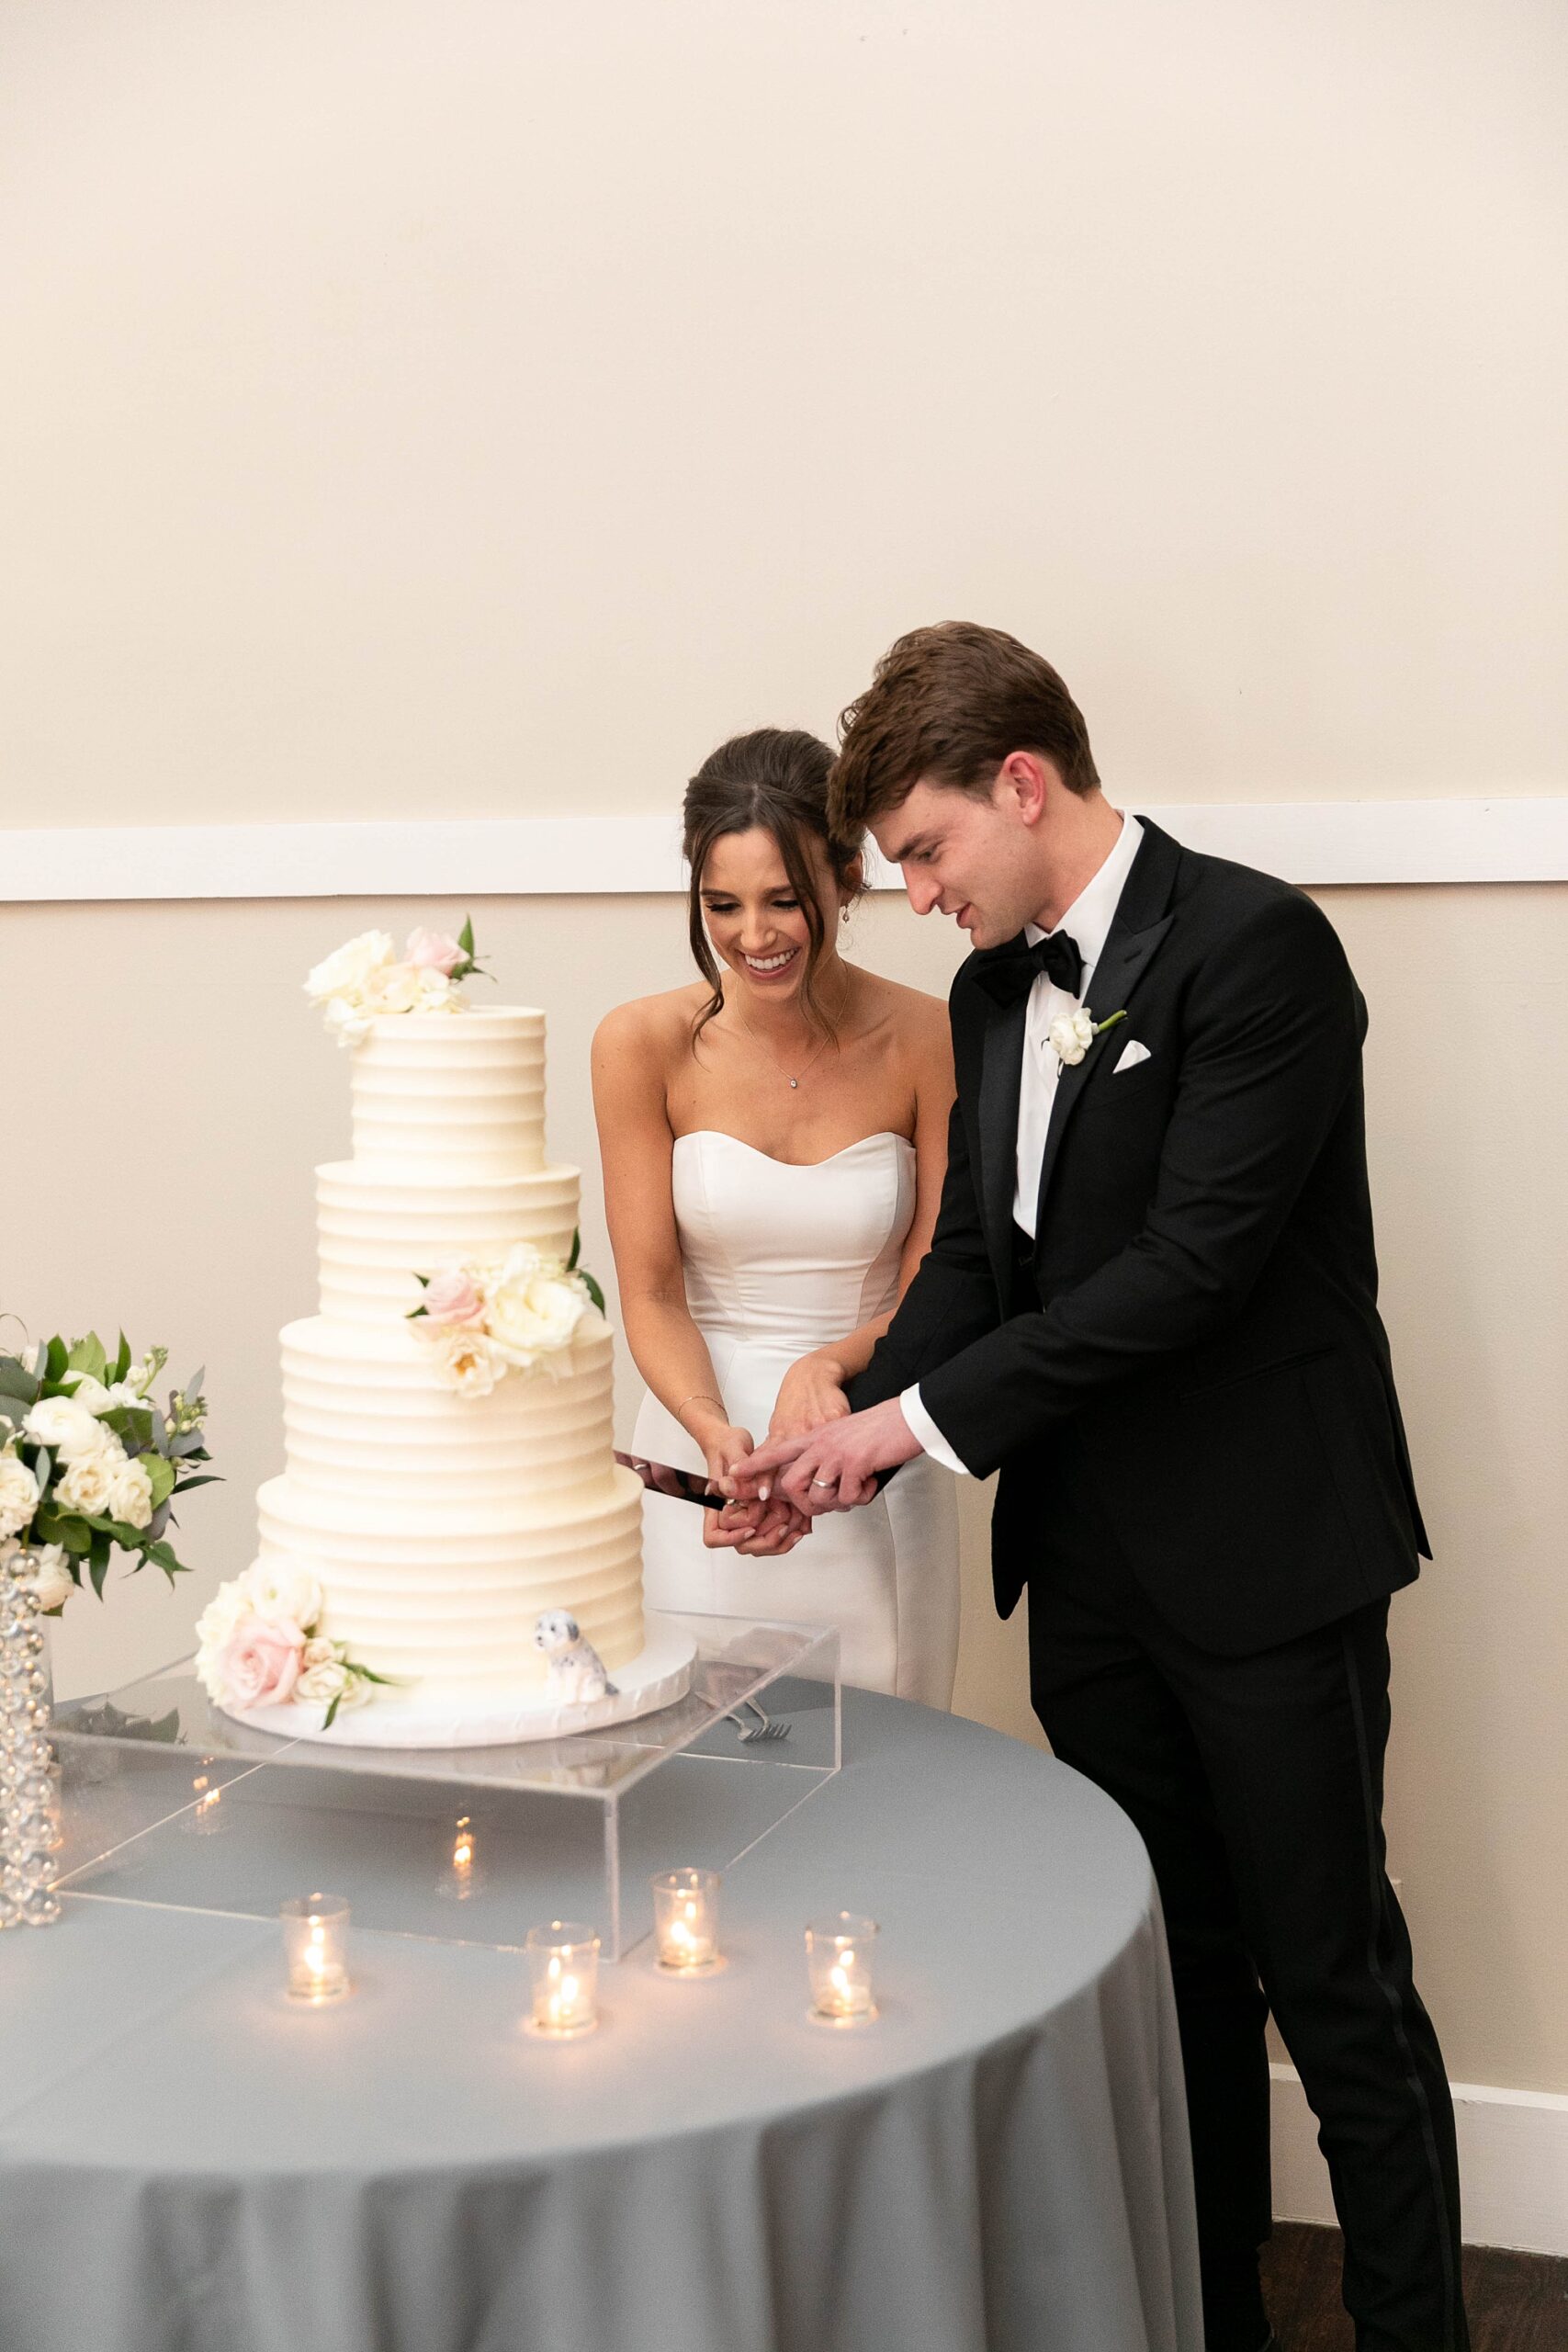 newlyweds cut wedding cake together during reception at the Room on Main